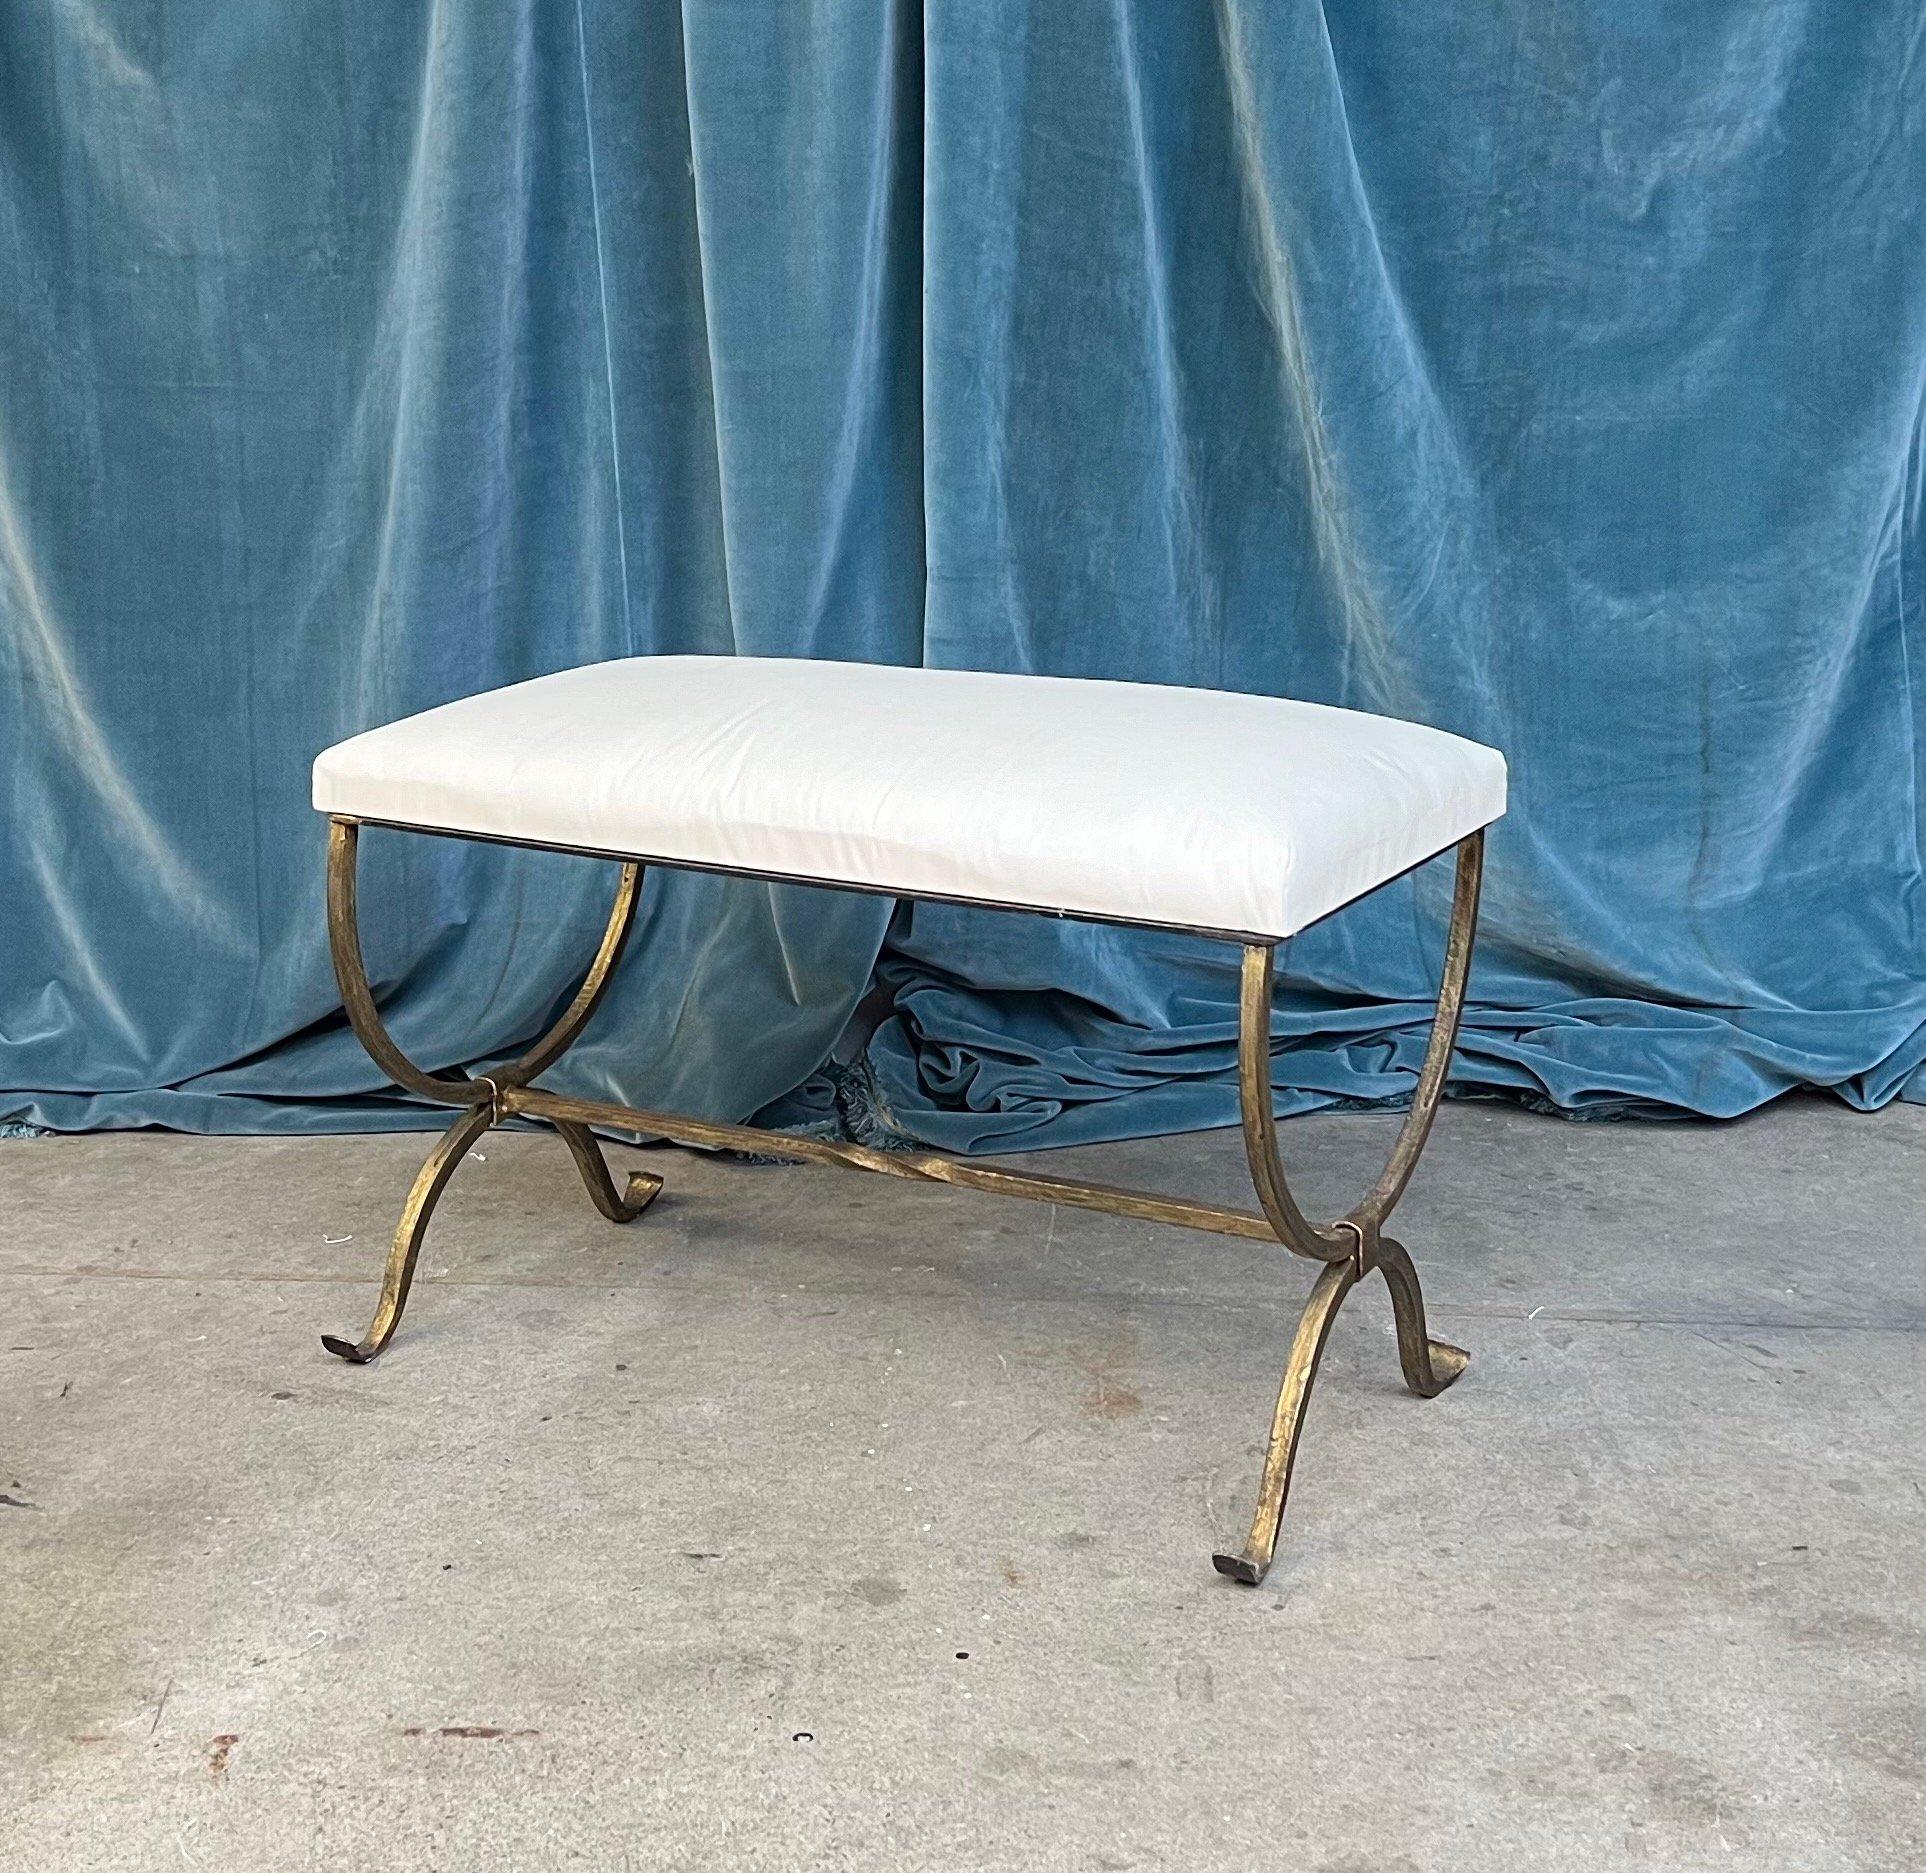 This elegant Spanish gilt iron bench was recently made by skilled artisans and features gently scrolled legs and a stretcher with a decorative center twist. Handmade by expert European craftsmen, it has a hand forged iron base with a rich but subtle